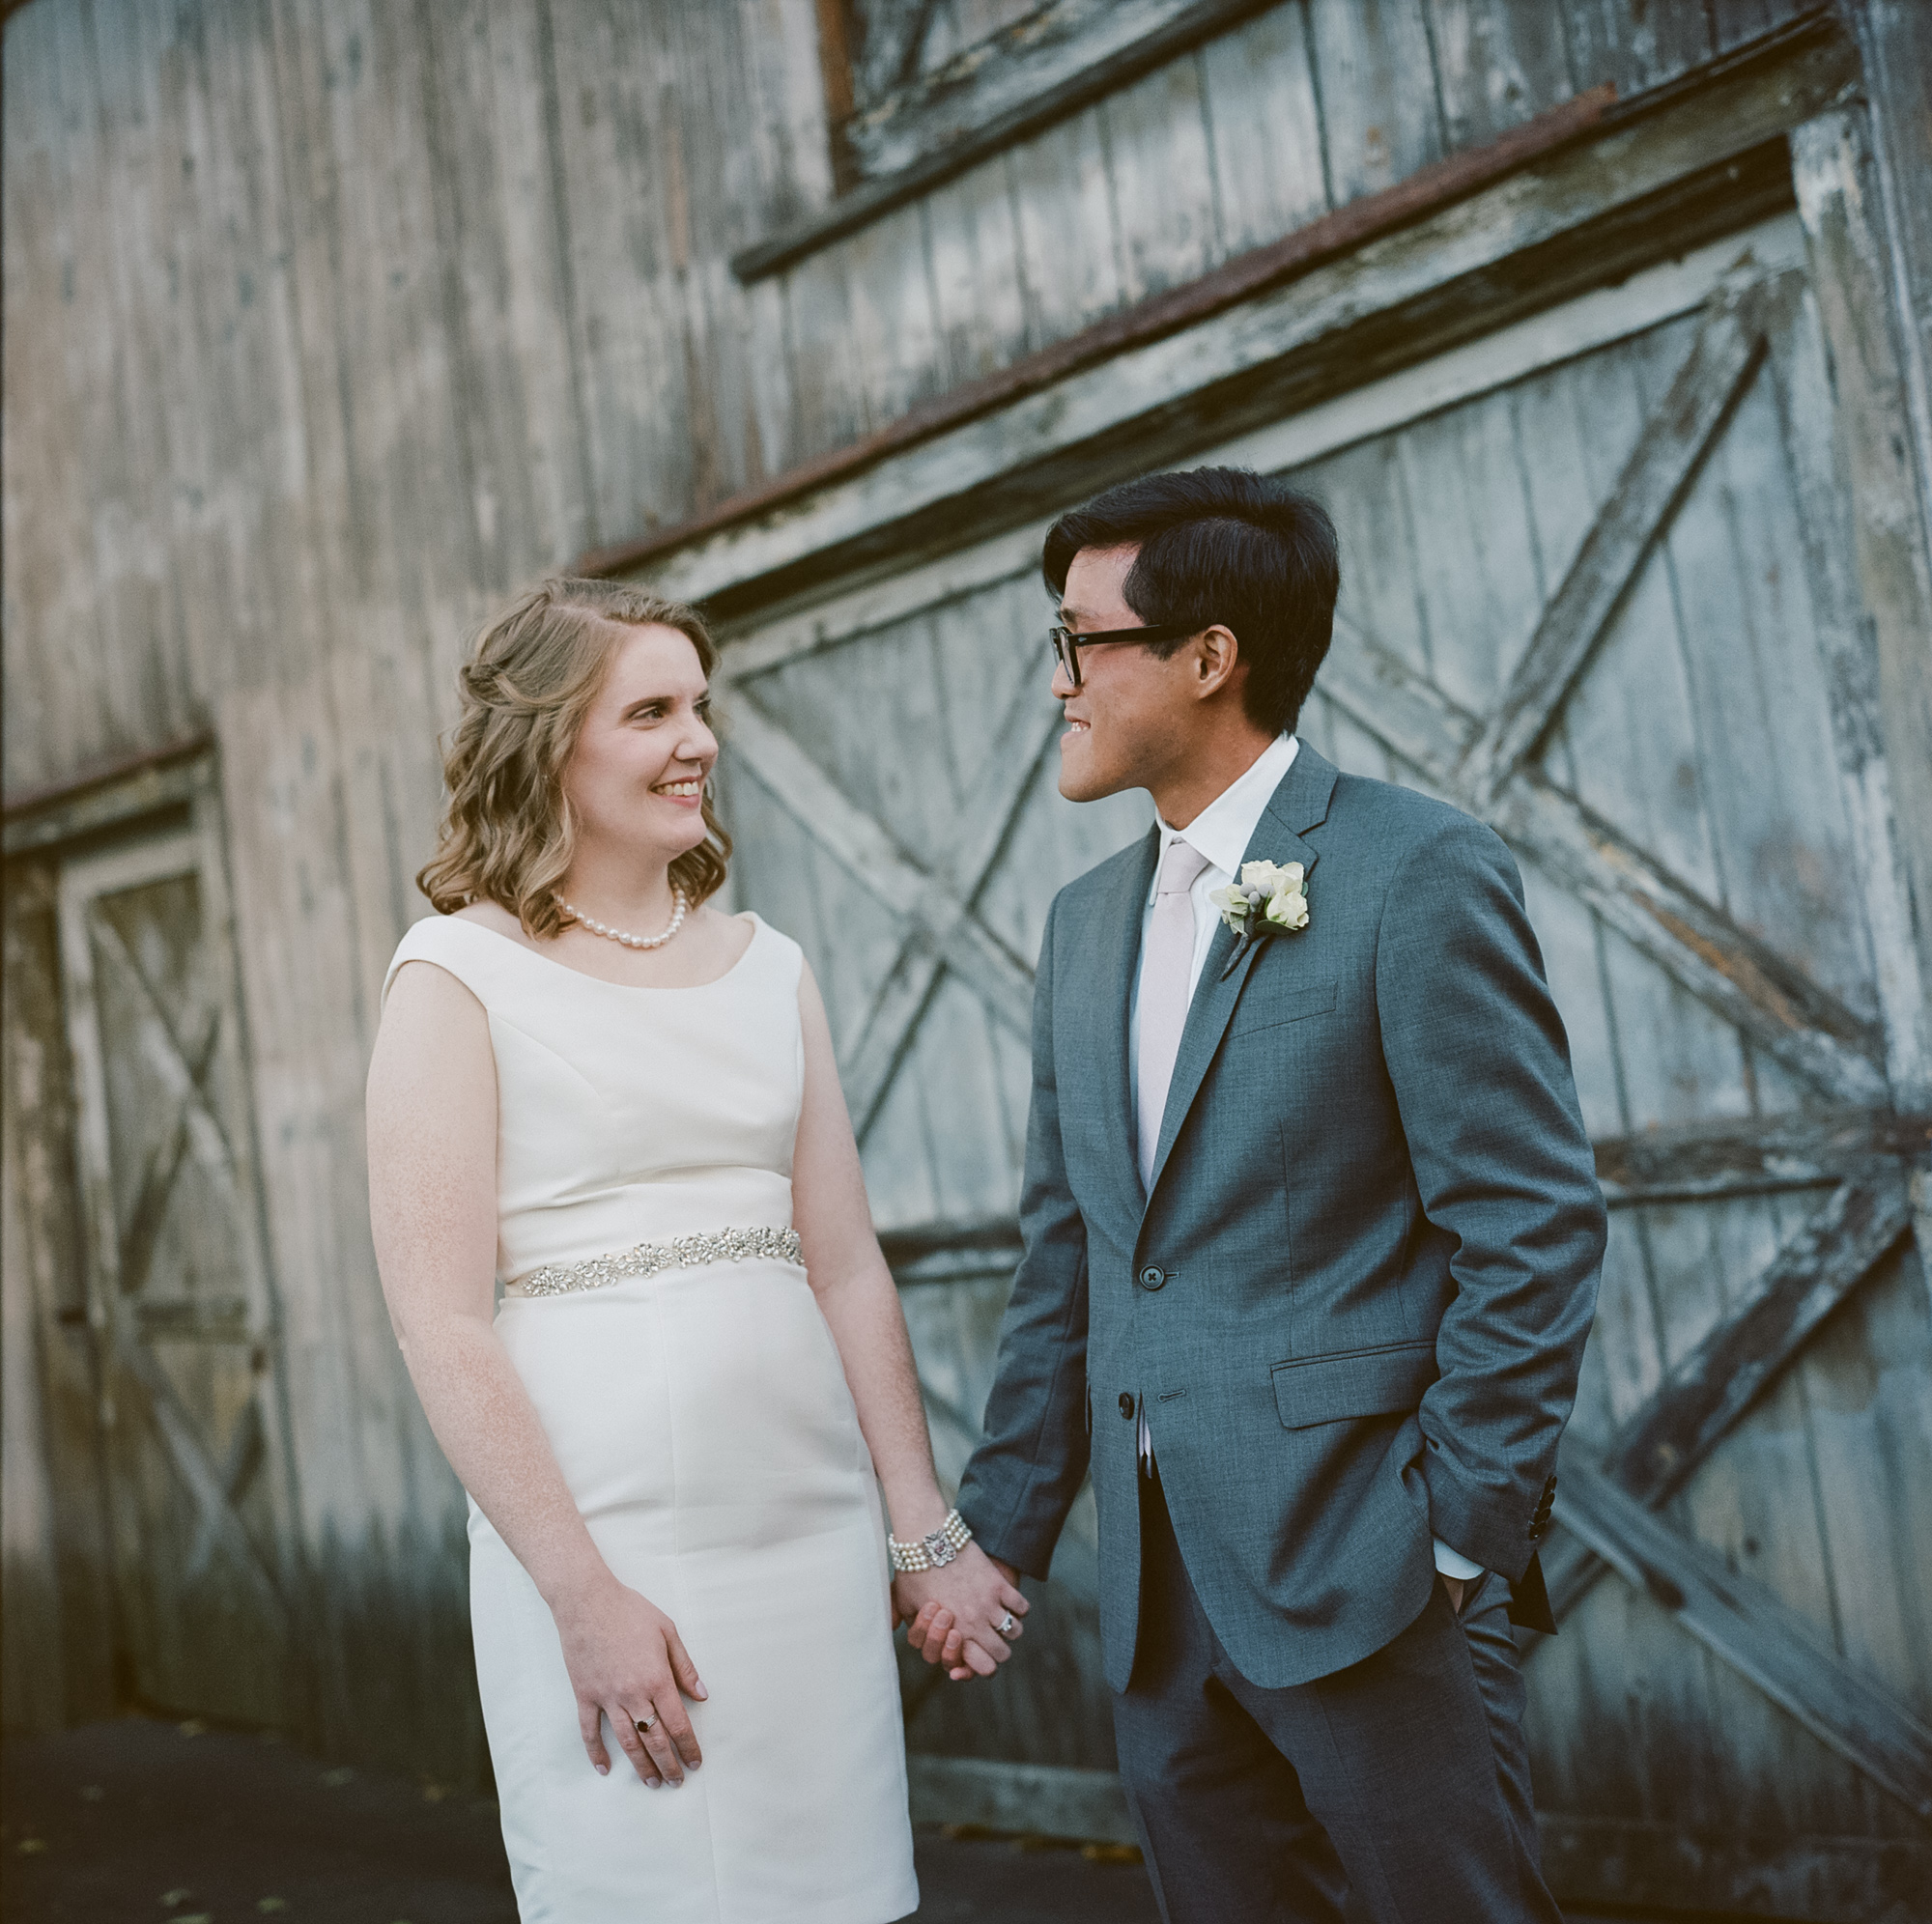 Timeless and classic fall wedding photography at the Bernards Inn